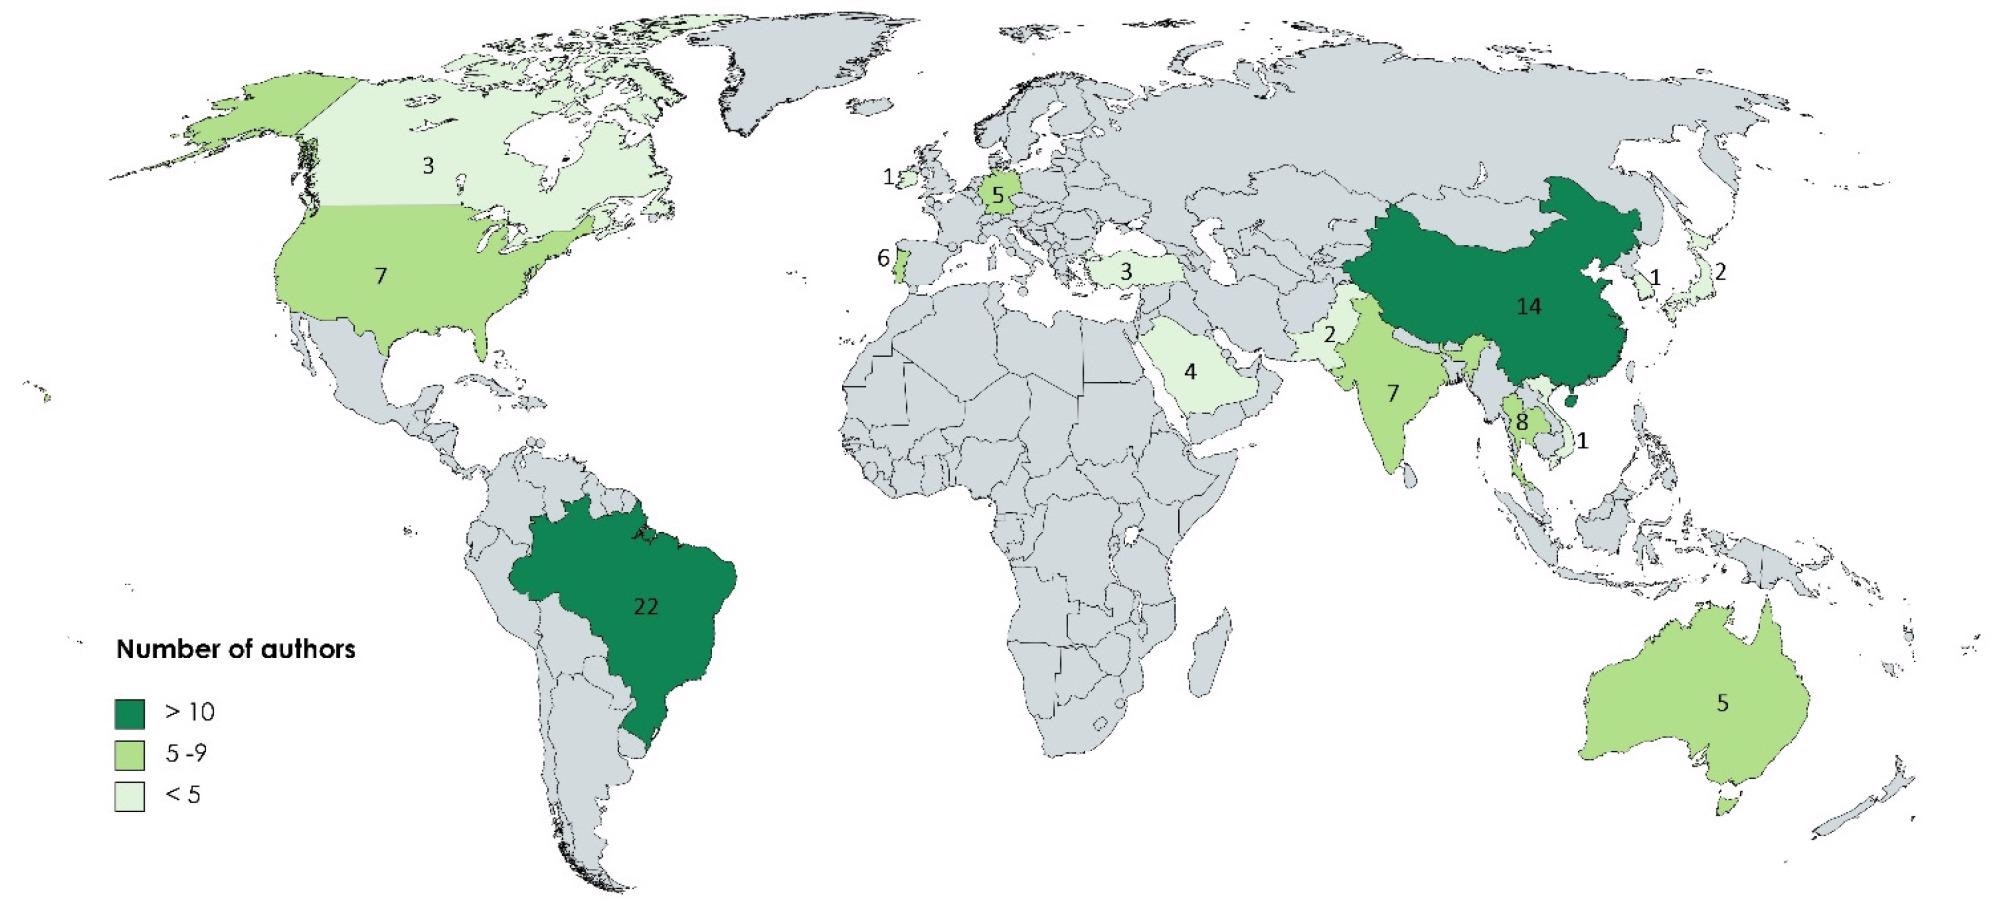 Number of authors from different countries (excluding authors with more than one contribution).